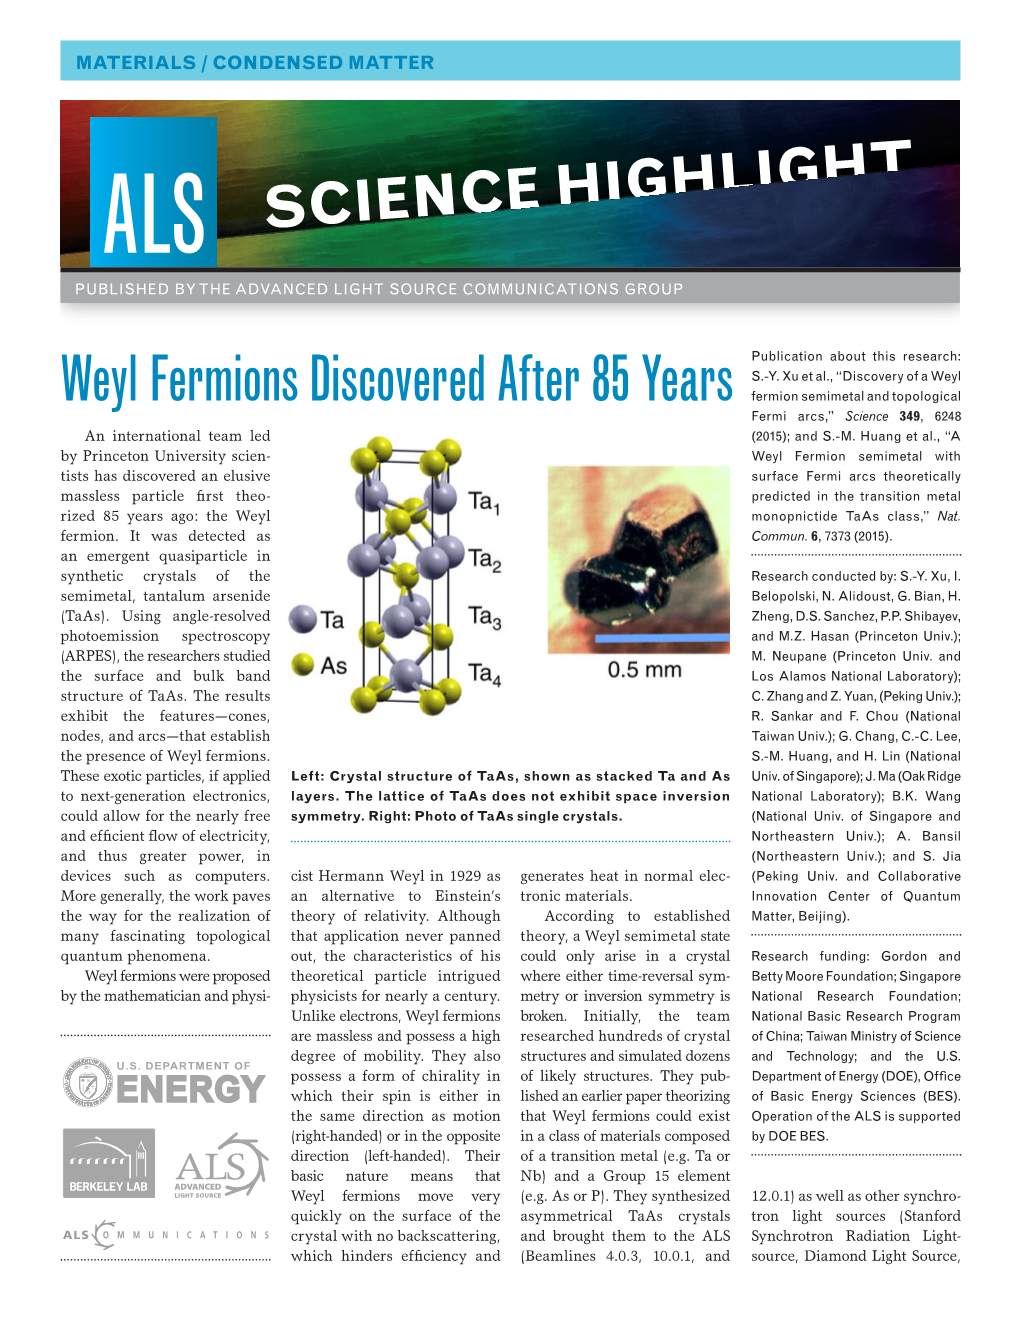 Weyl Fermions Discovered After 85 Years Fermion Semimetal and Topological Fermi Arcs,” Science 349, 6248 an International Team Led (2015); and S.-M